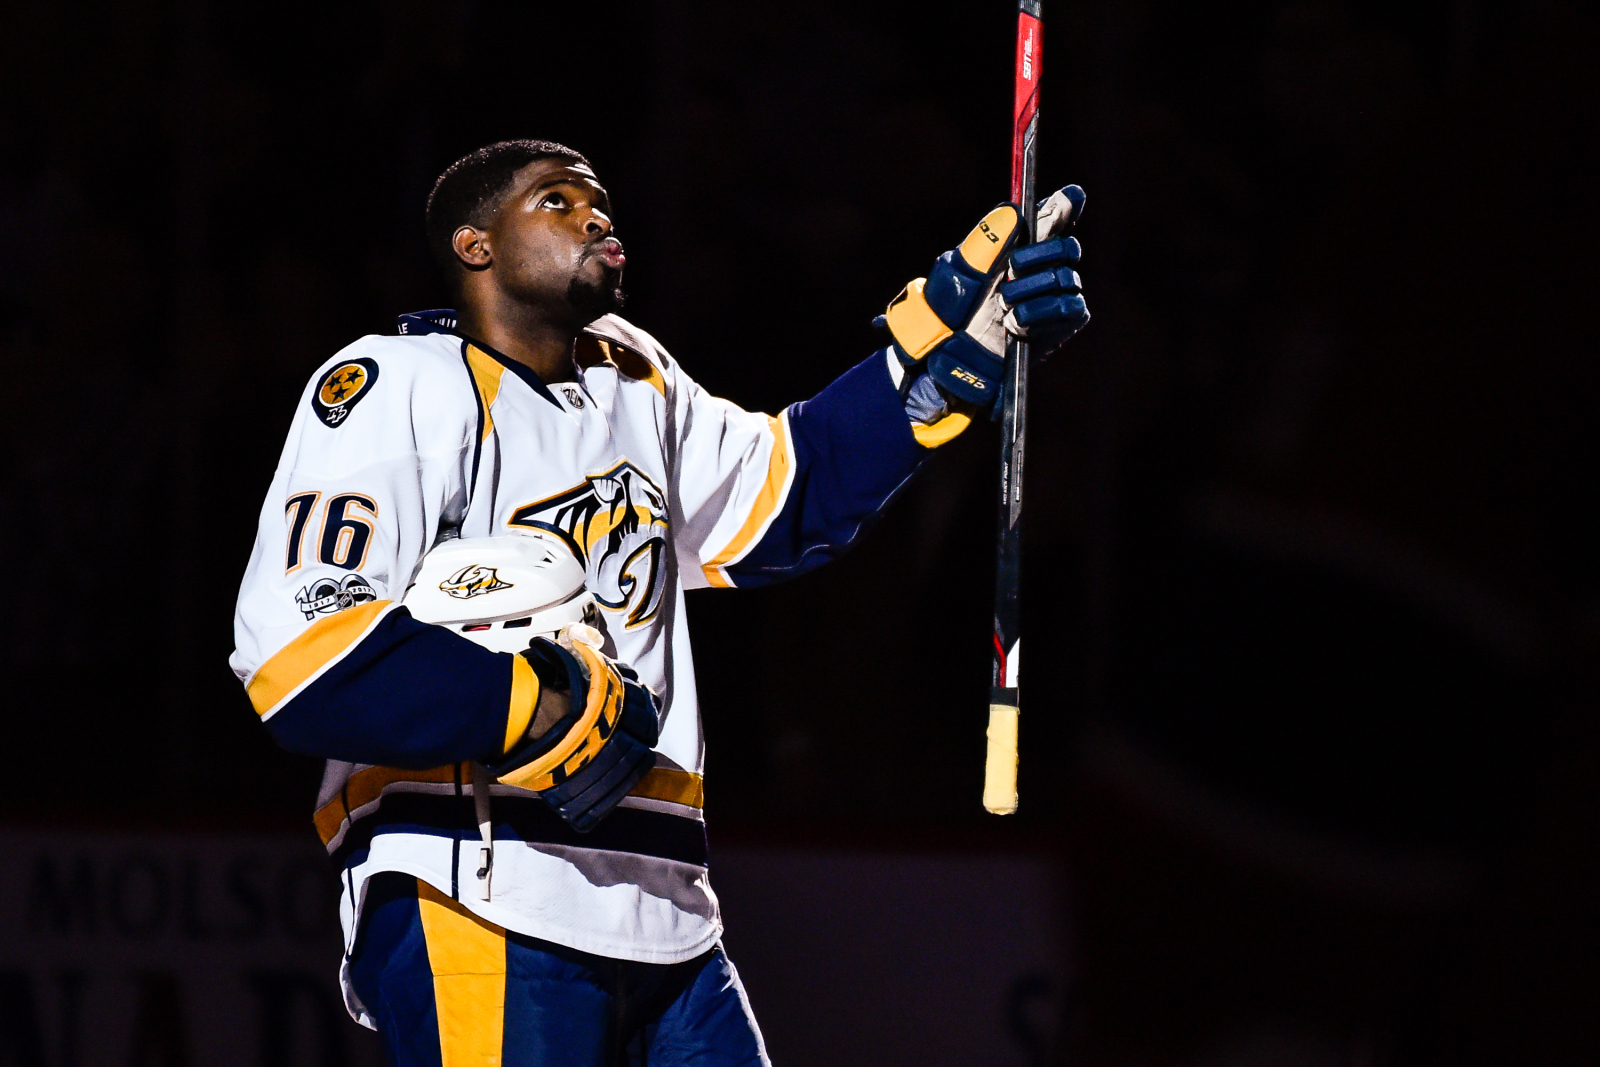 P.K. Subban retires from NHL, former NJ Devils player